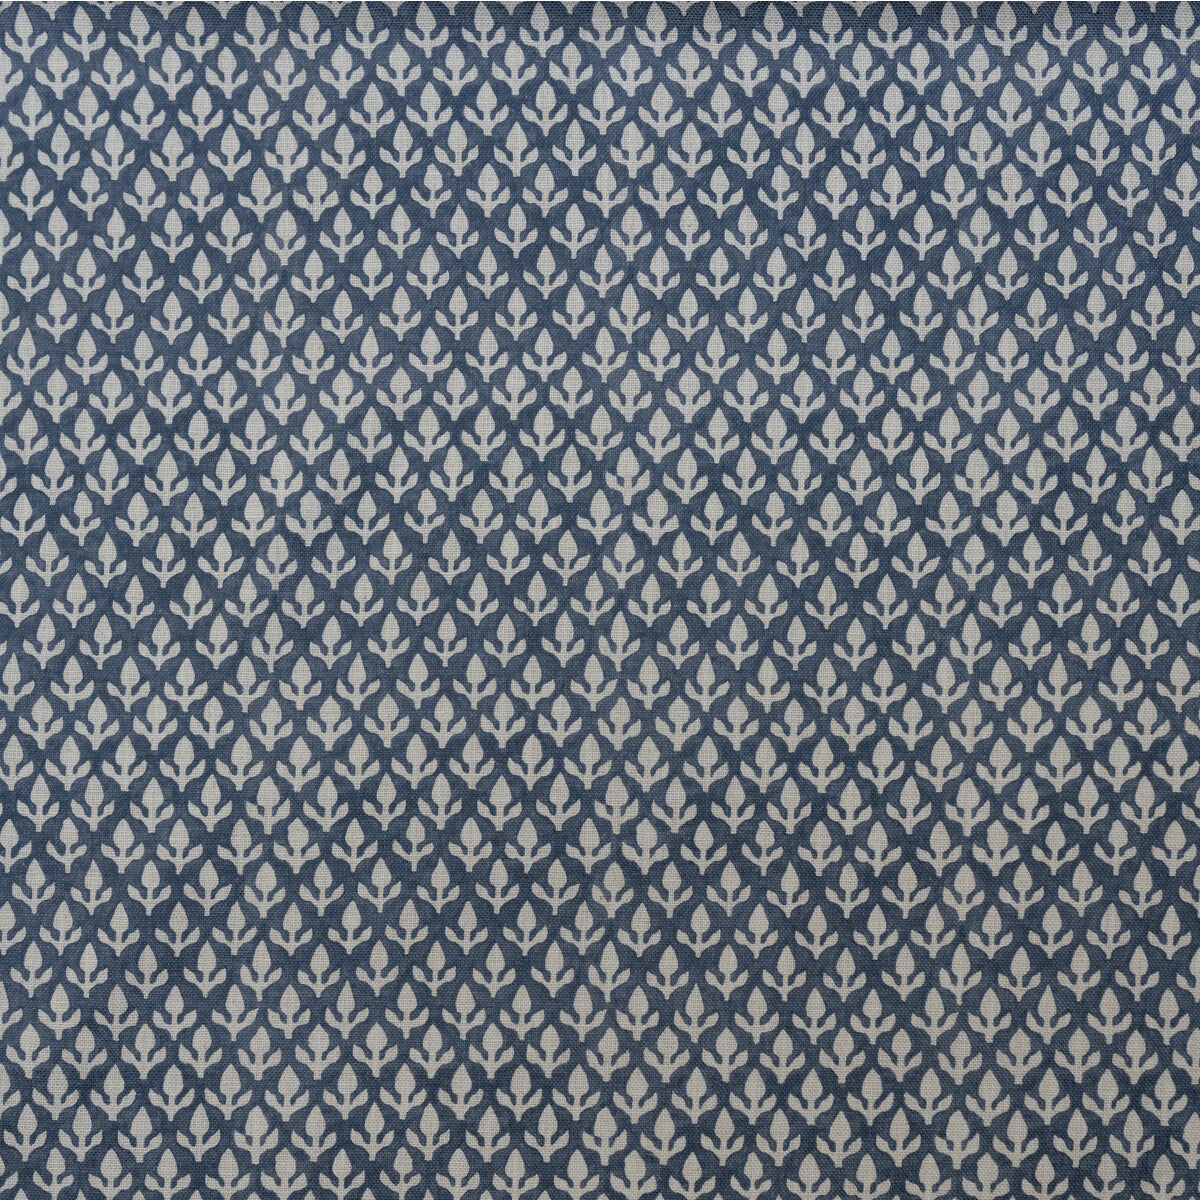 Bud fabric in denim color - pattern AM100379.50.0 - by Kravet Couture in the Andrew Martin Garden Path collection